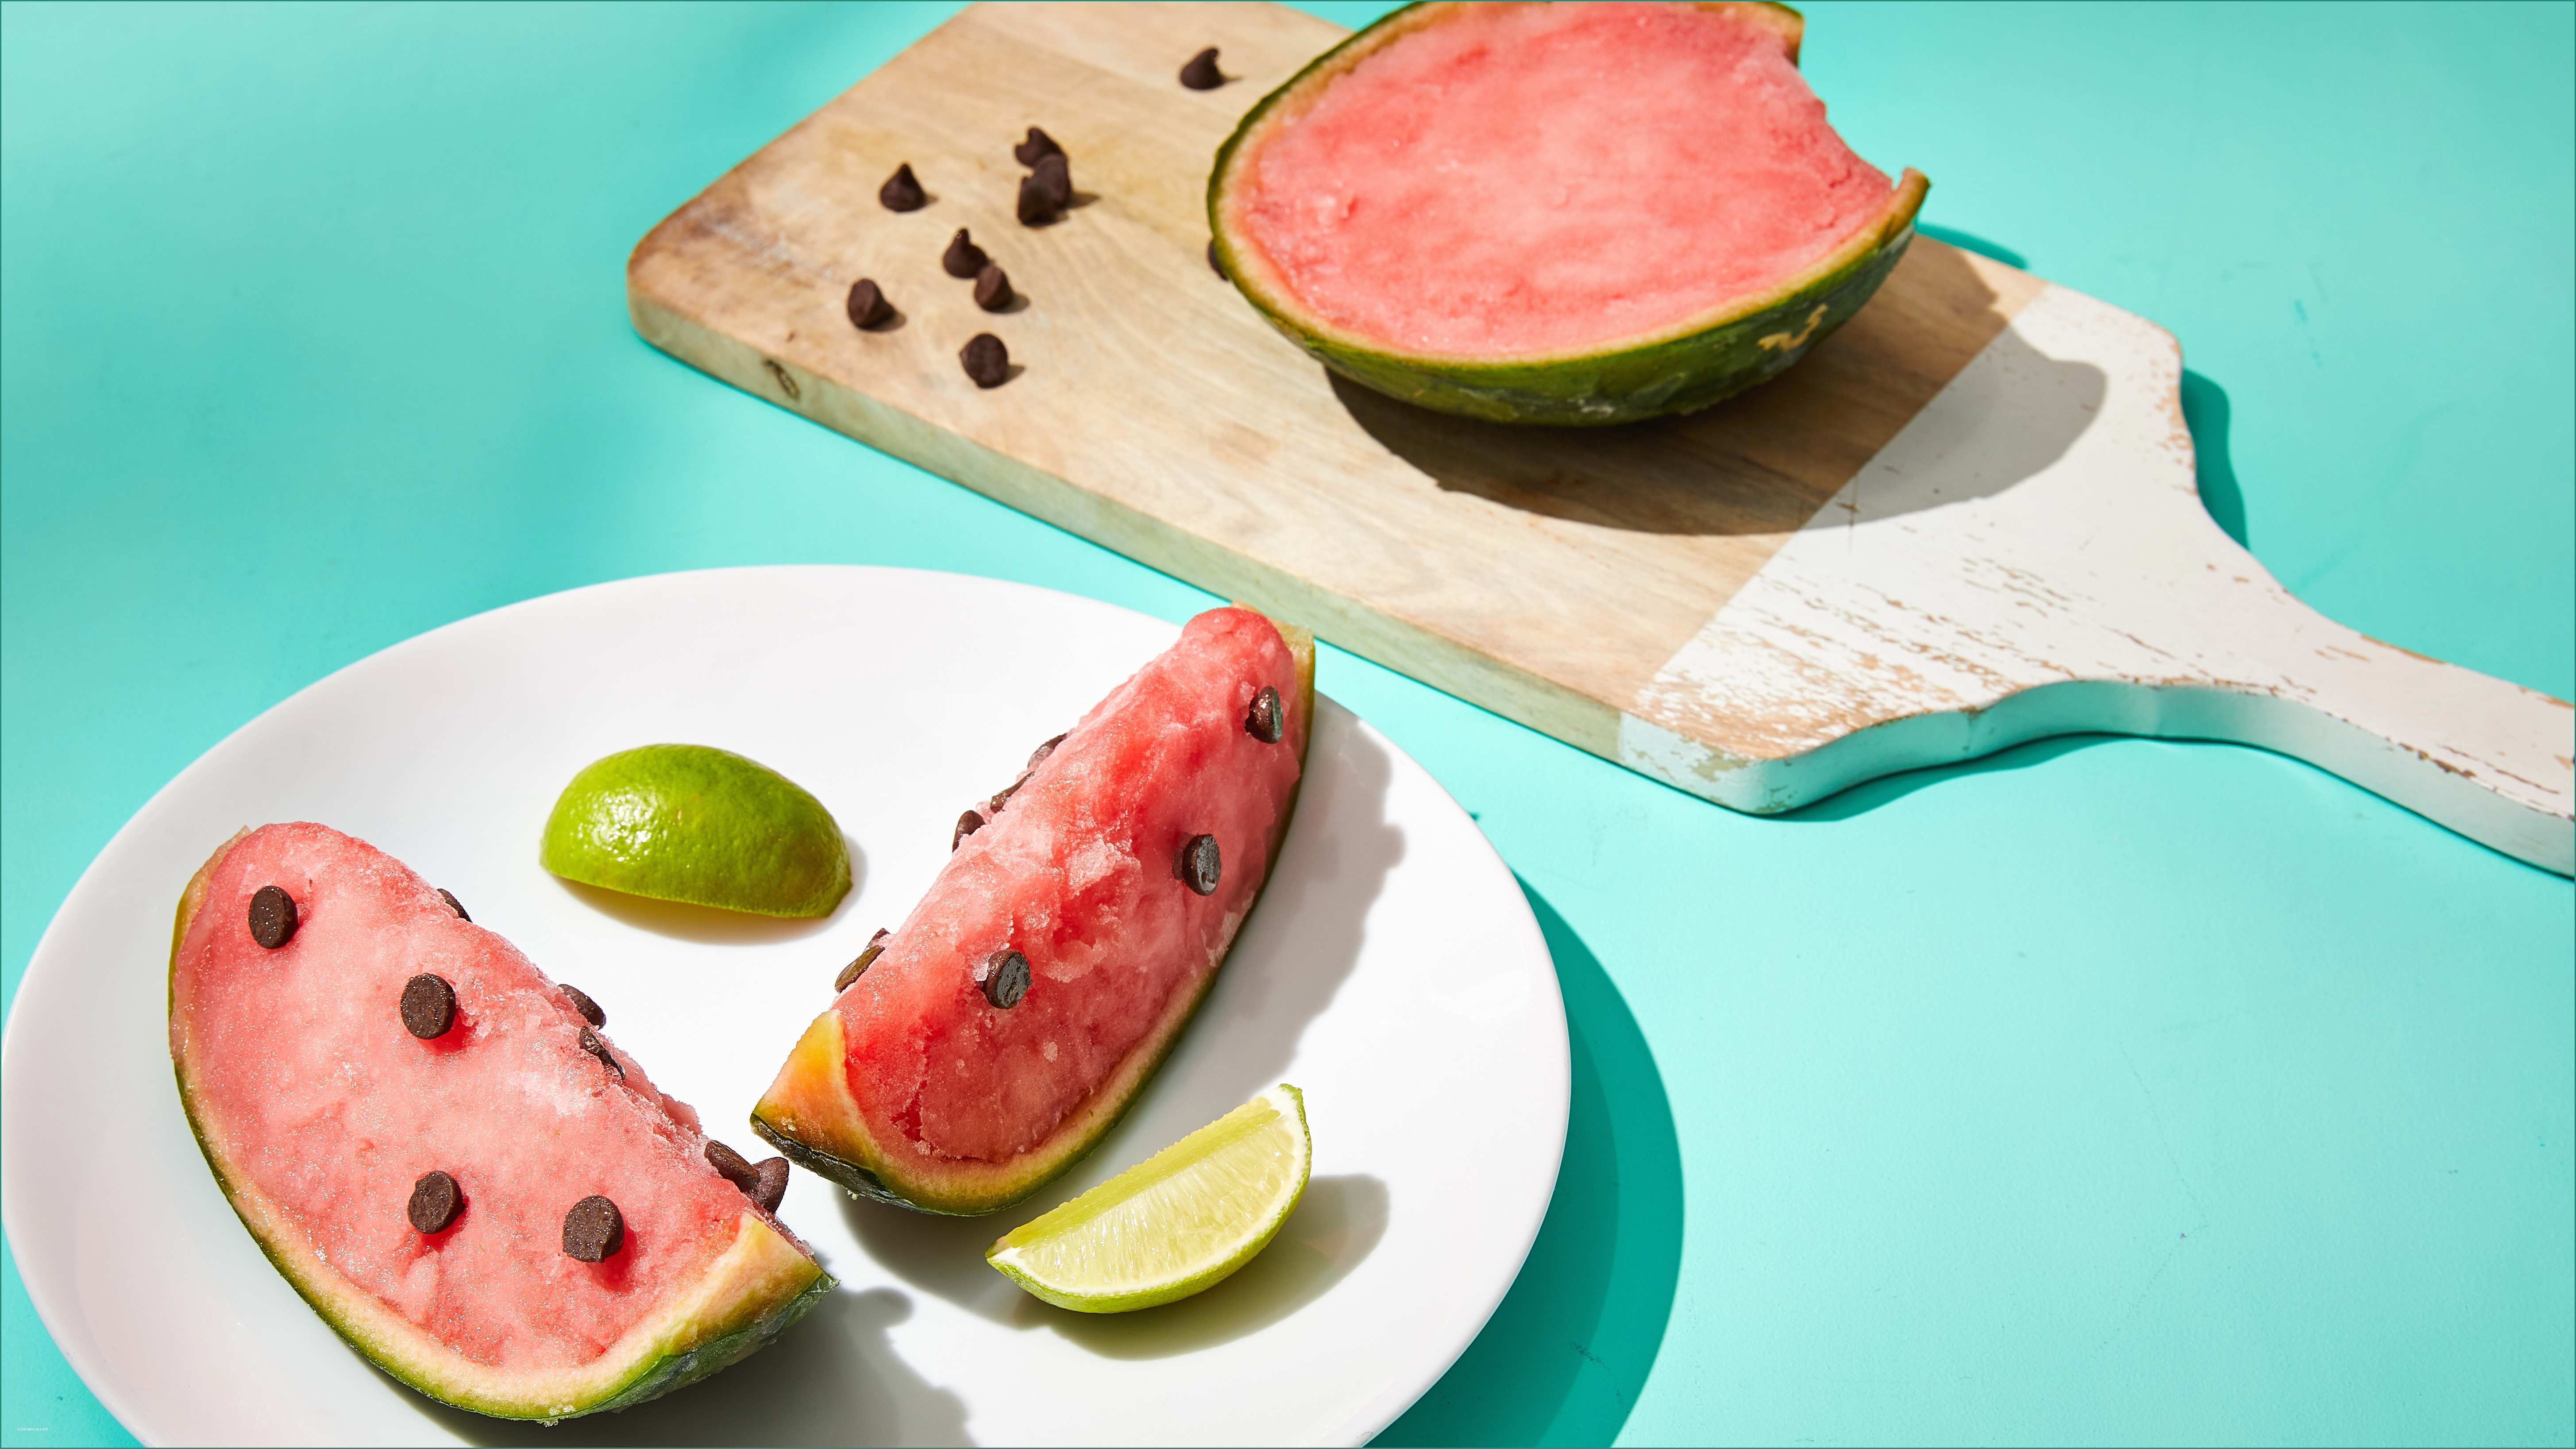 Persiane Leroy Merlin E This Watermelon sorbet is Served Inside An Actual Watermelon and It